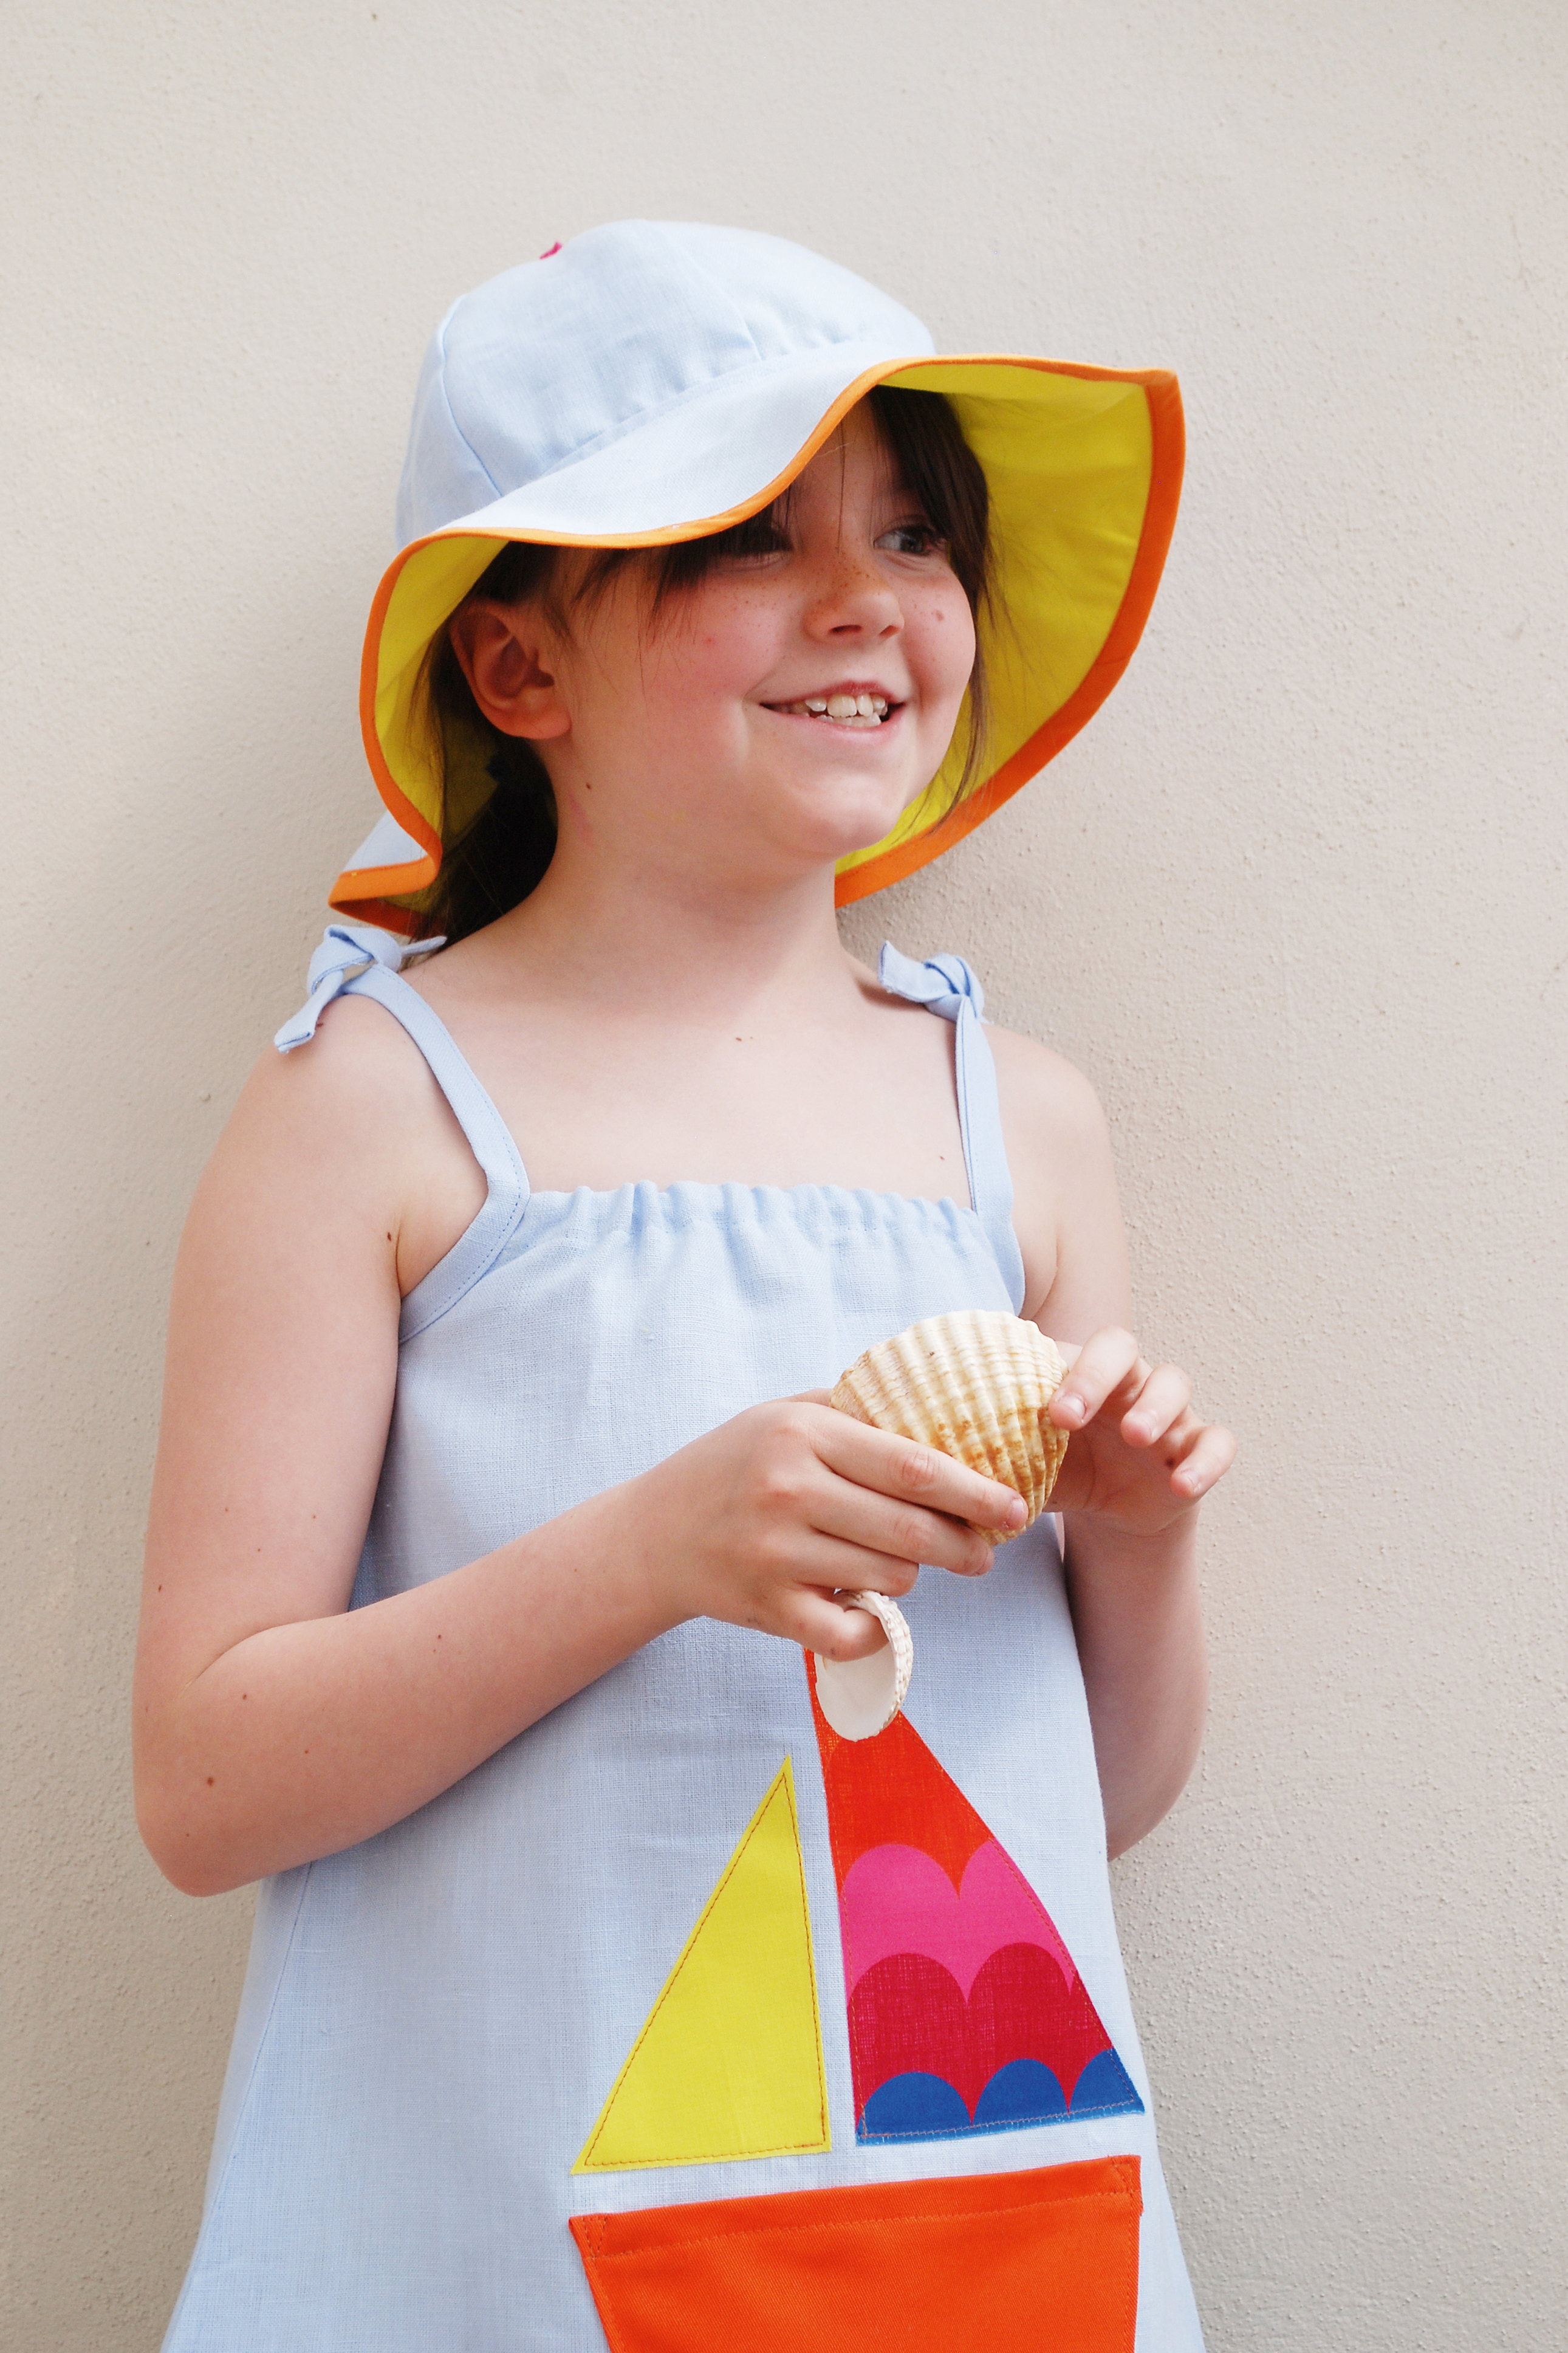 How to make a sun hat